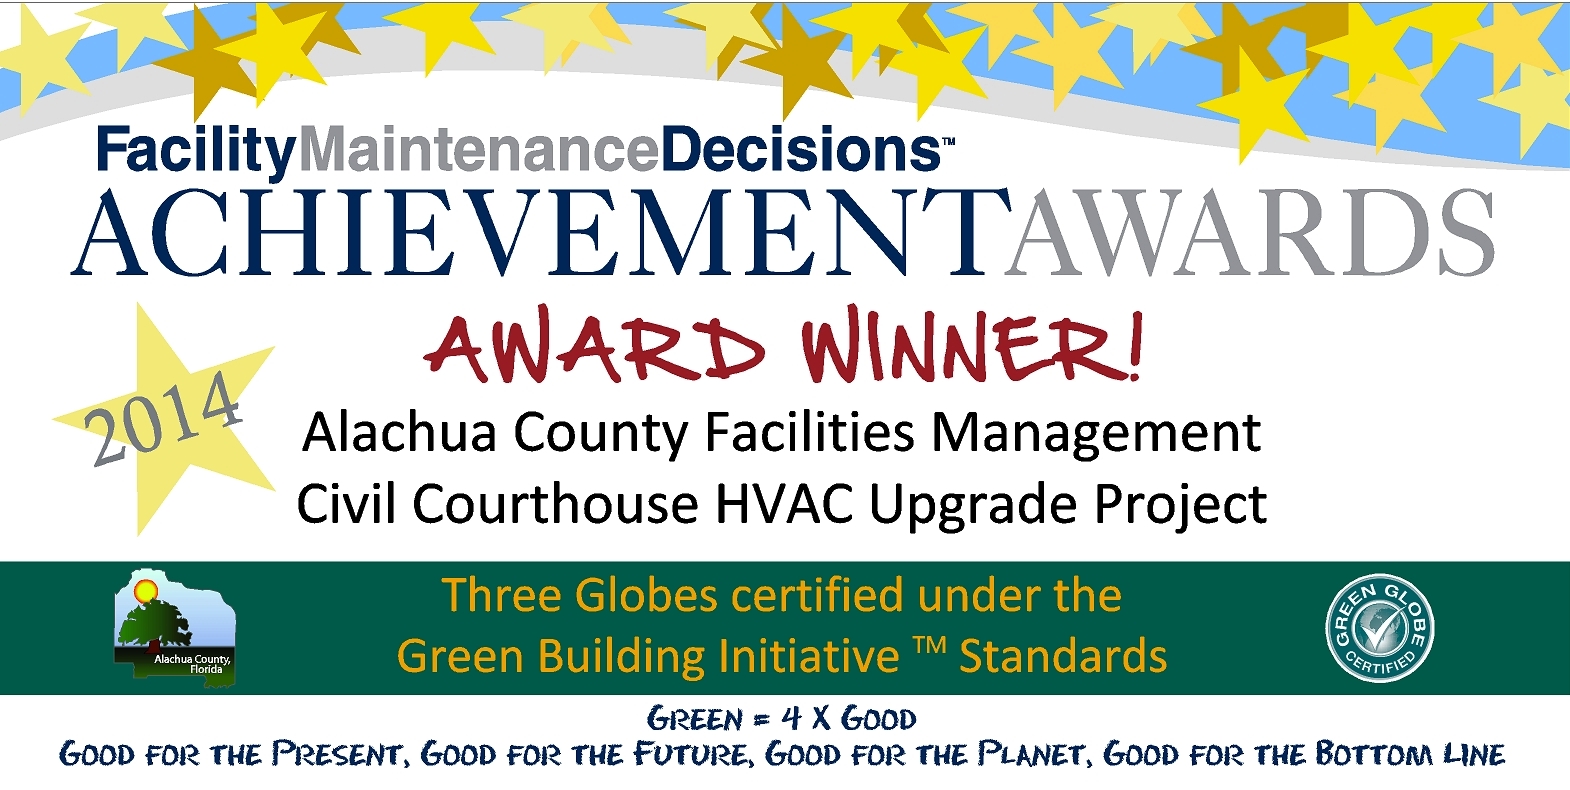 Facility Maintenance Decisions Achievement Awards.  2014 Award Winner! Alachua County Facilities Managment Civic Courthouse HVAC Upgrade Project